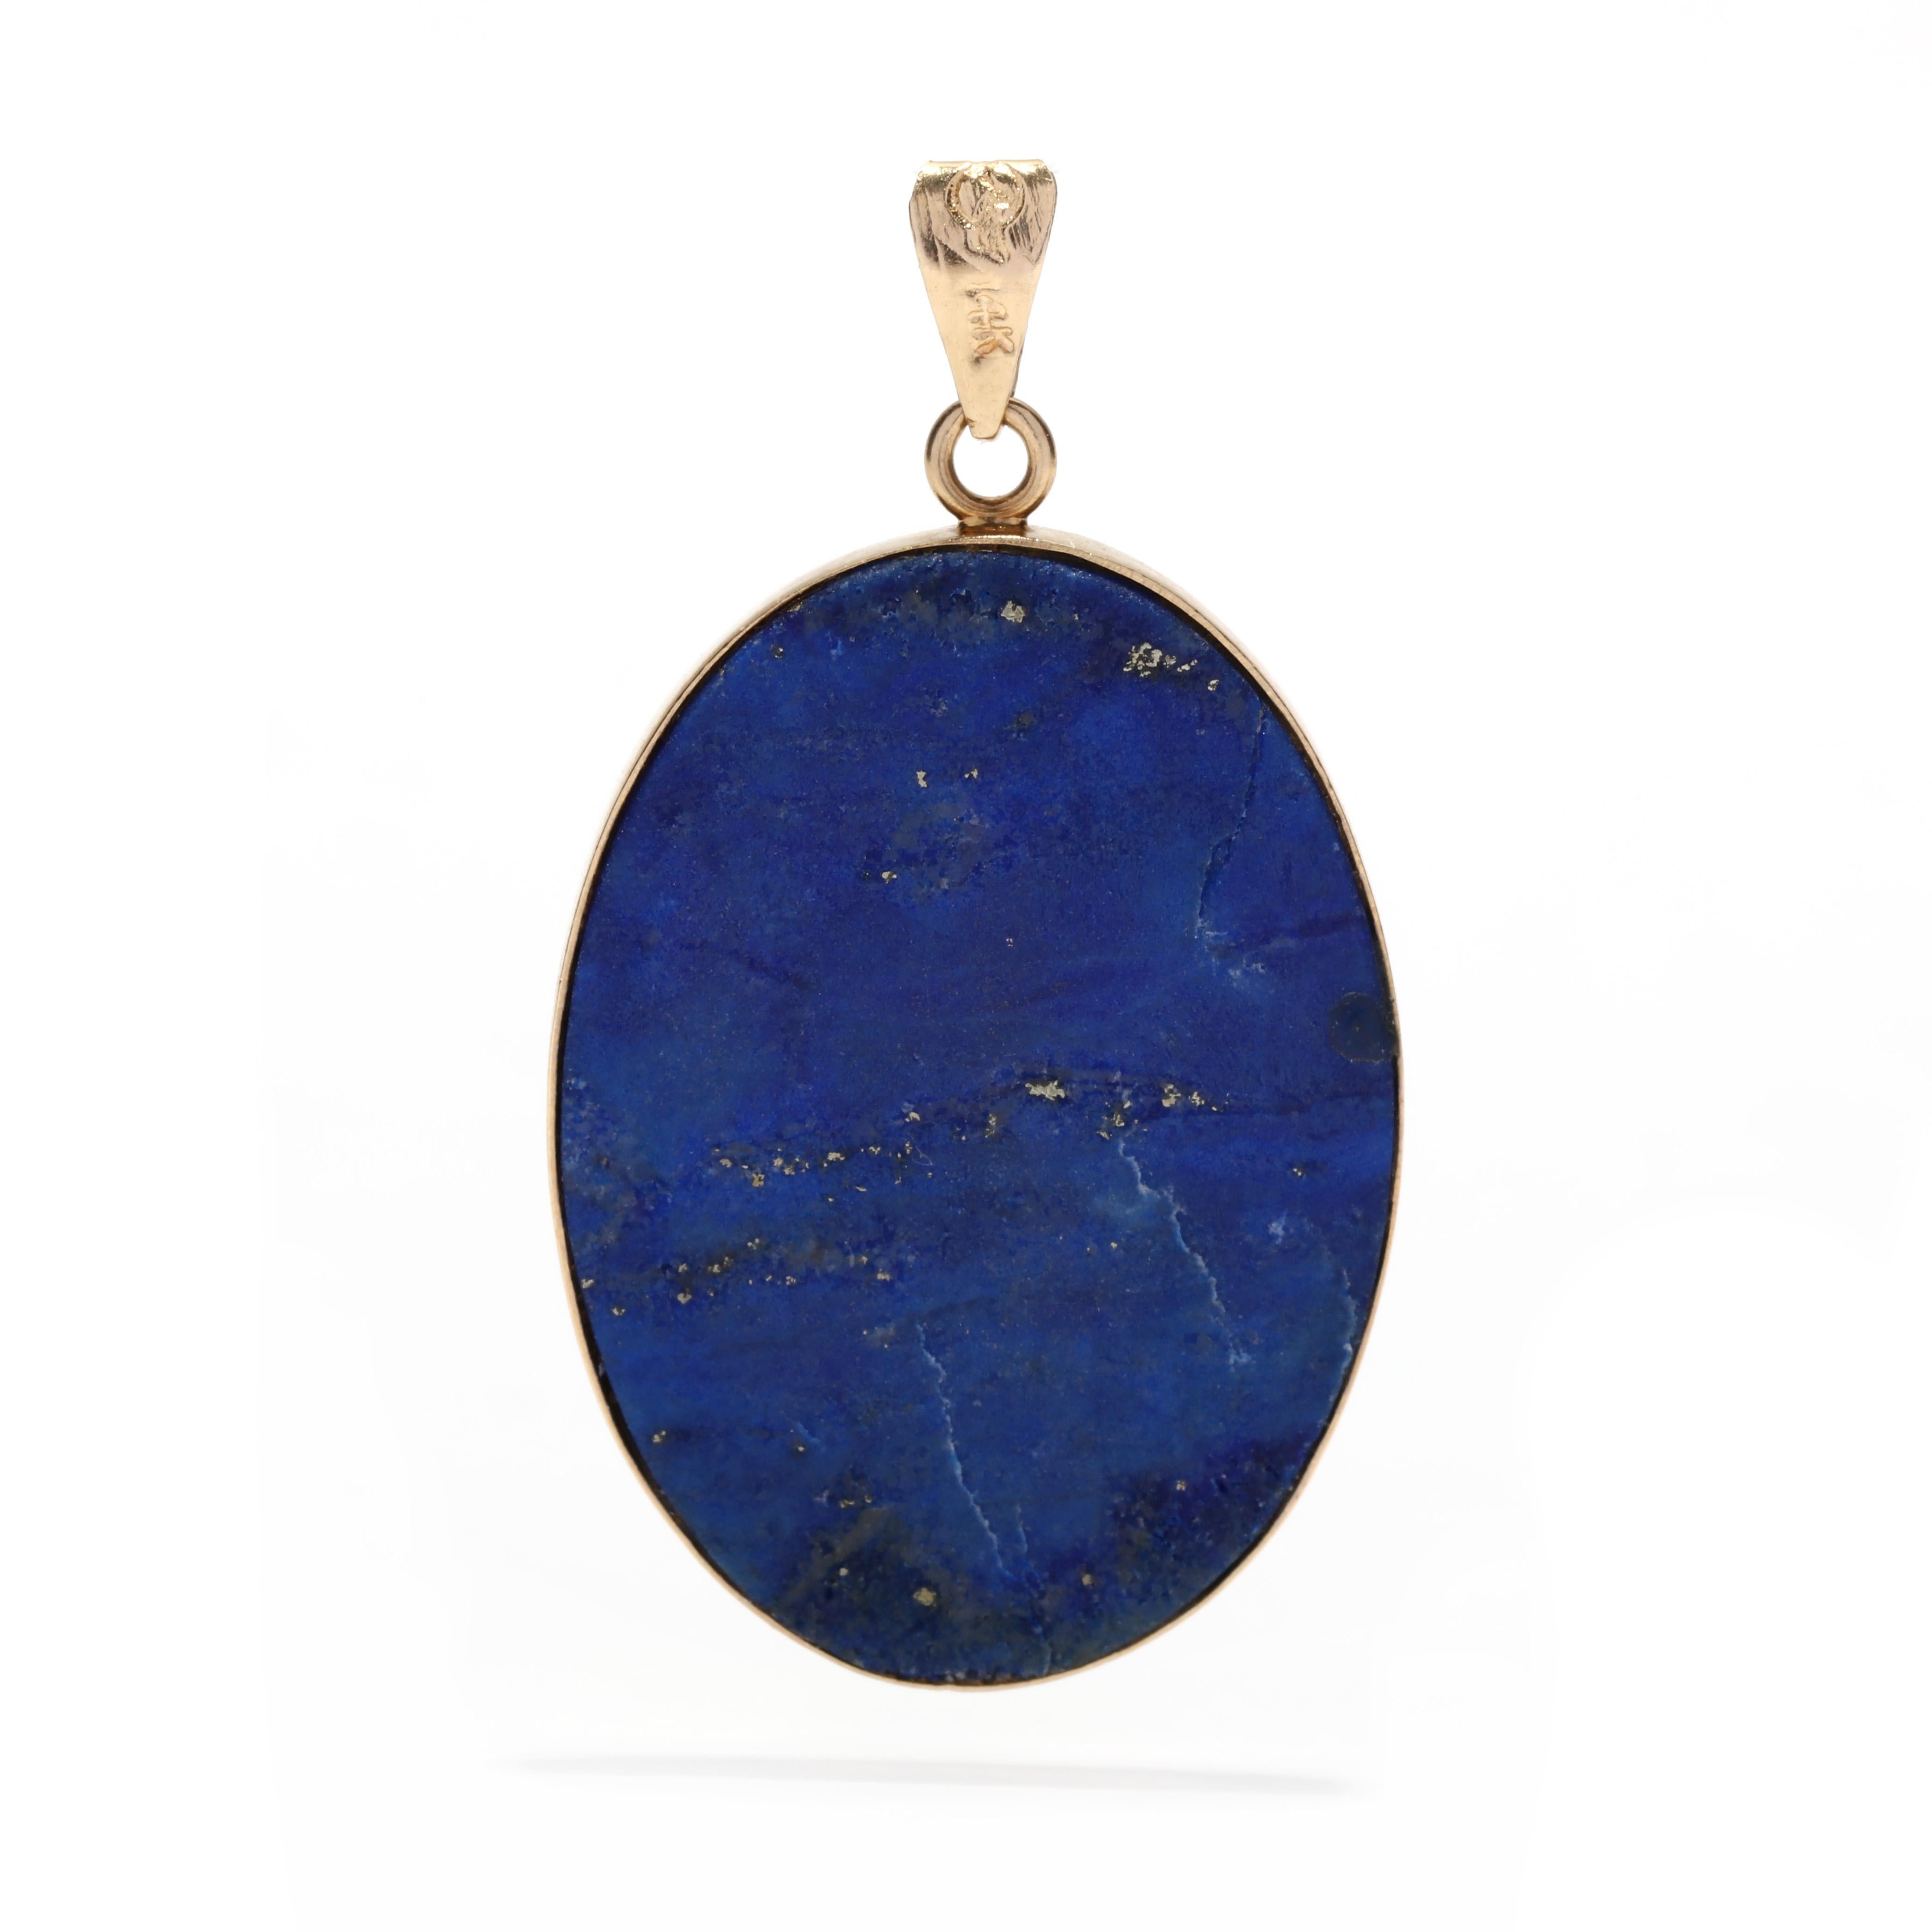 A vintage 14 karat yellow gold lapis panda pendant. This pendant features an oval tablet blue lapis lazuli stone with a gold over lay depicting a scenic portrait of a panda, and all bezel set with a tapered bail.

Length: 1 3/8 in.

Width: 3/4